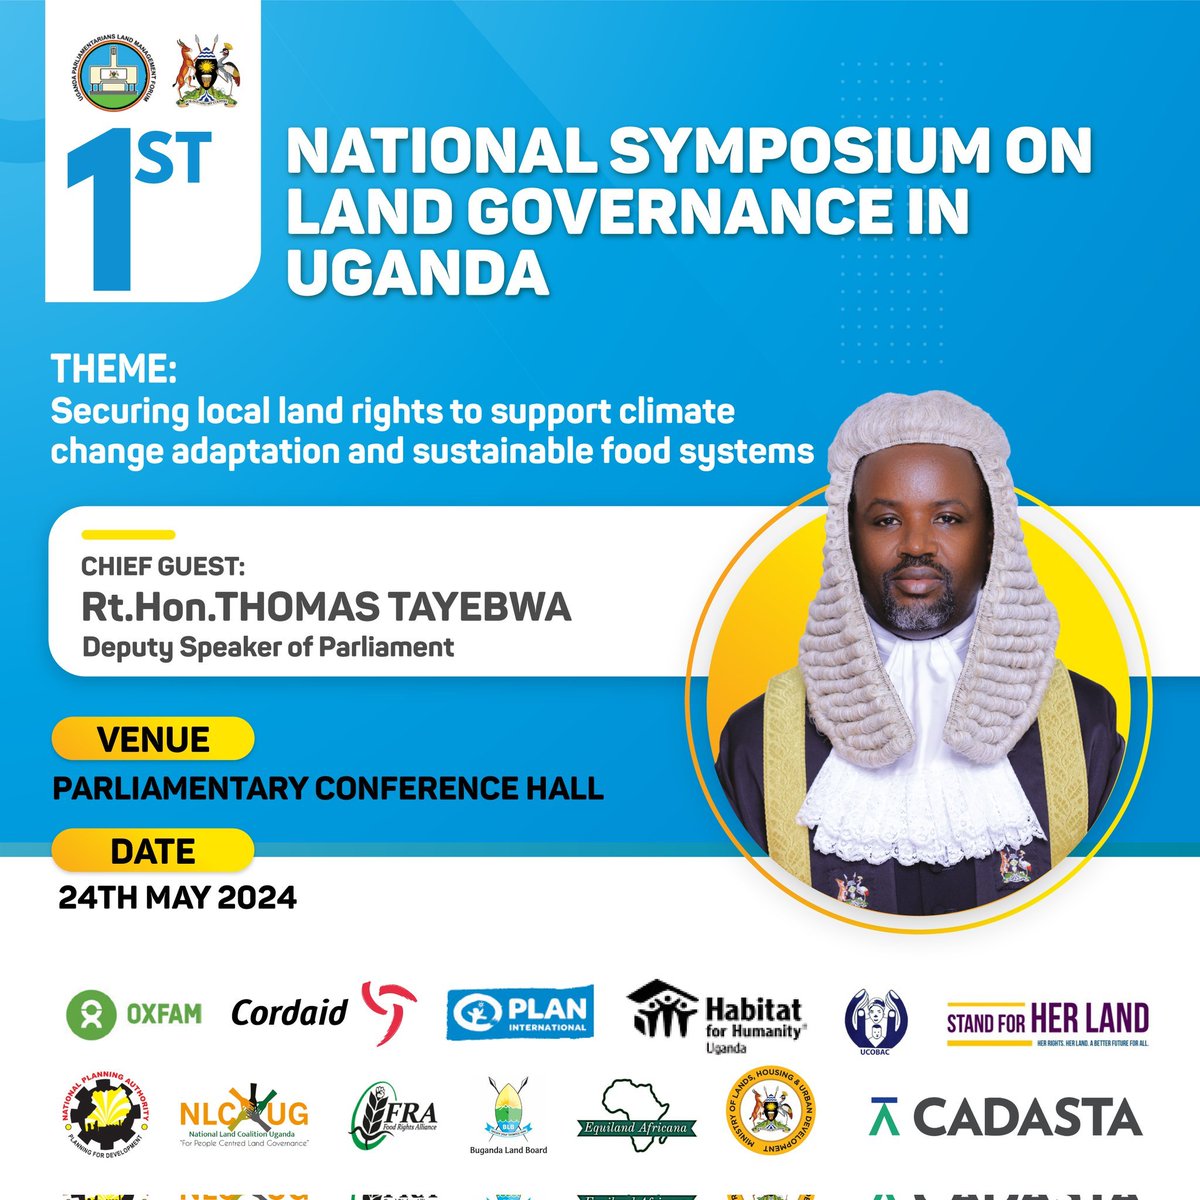 🗓️Save the date for the upcoming Land Governance #Symposium. The participants will deliberate on the matters surrounding #landrights and sustainable development. The chief guest will be Rt Hon Deputy Speaker of Parliament @Thomas_Tayebwa. #Landrights